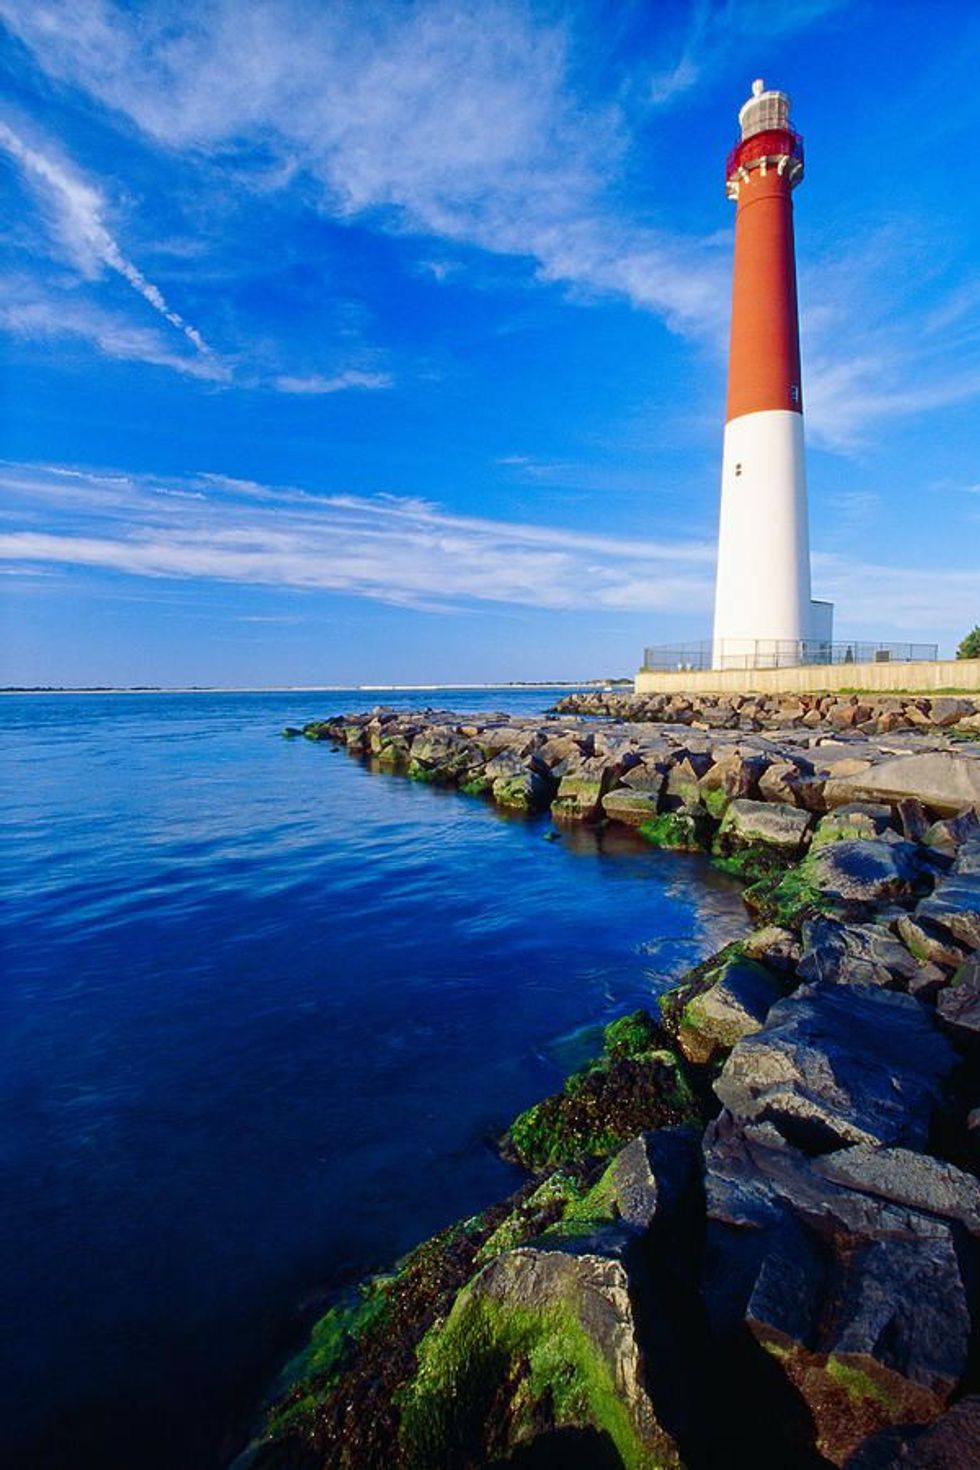 10 Of The Best Things From LBI You Miss In Off-Season